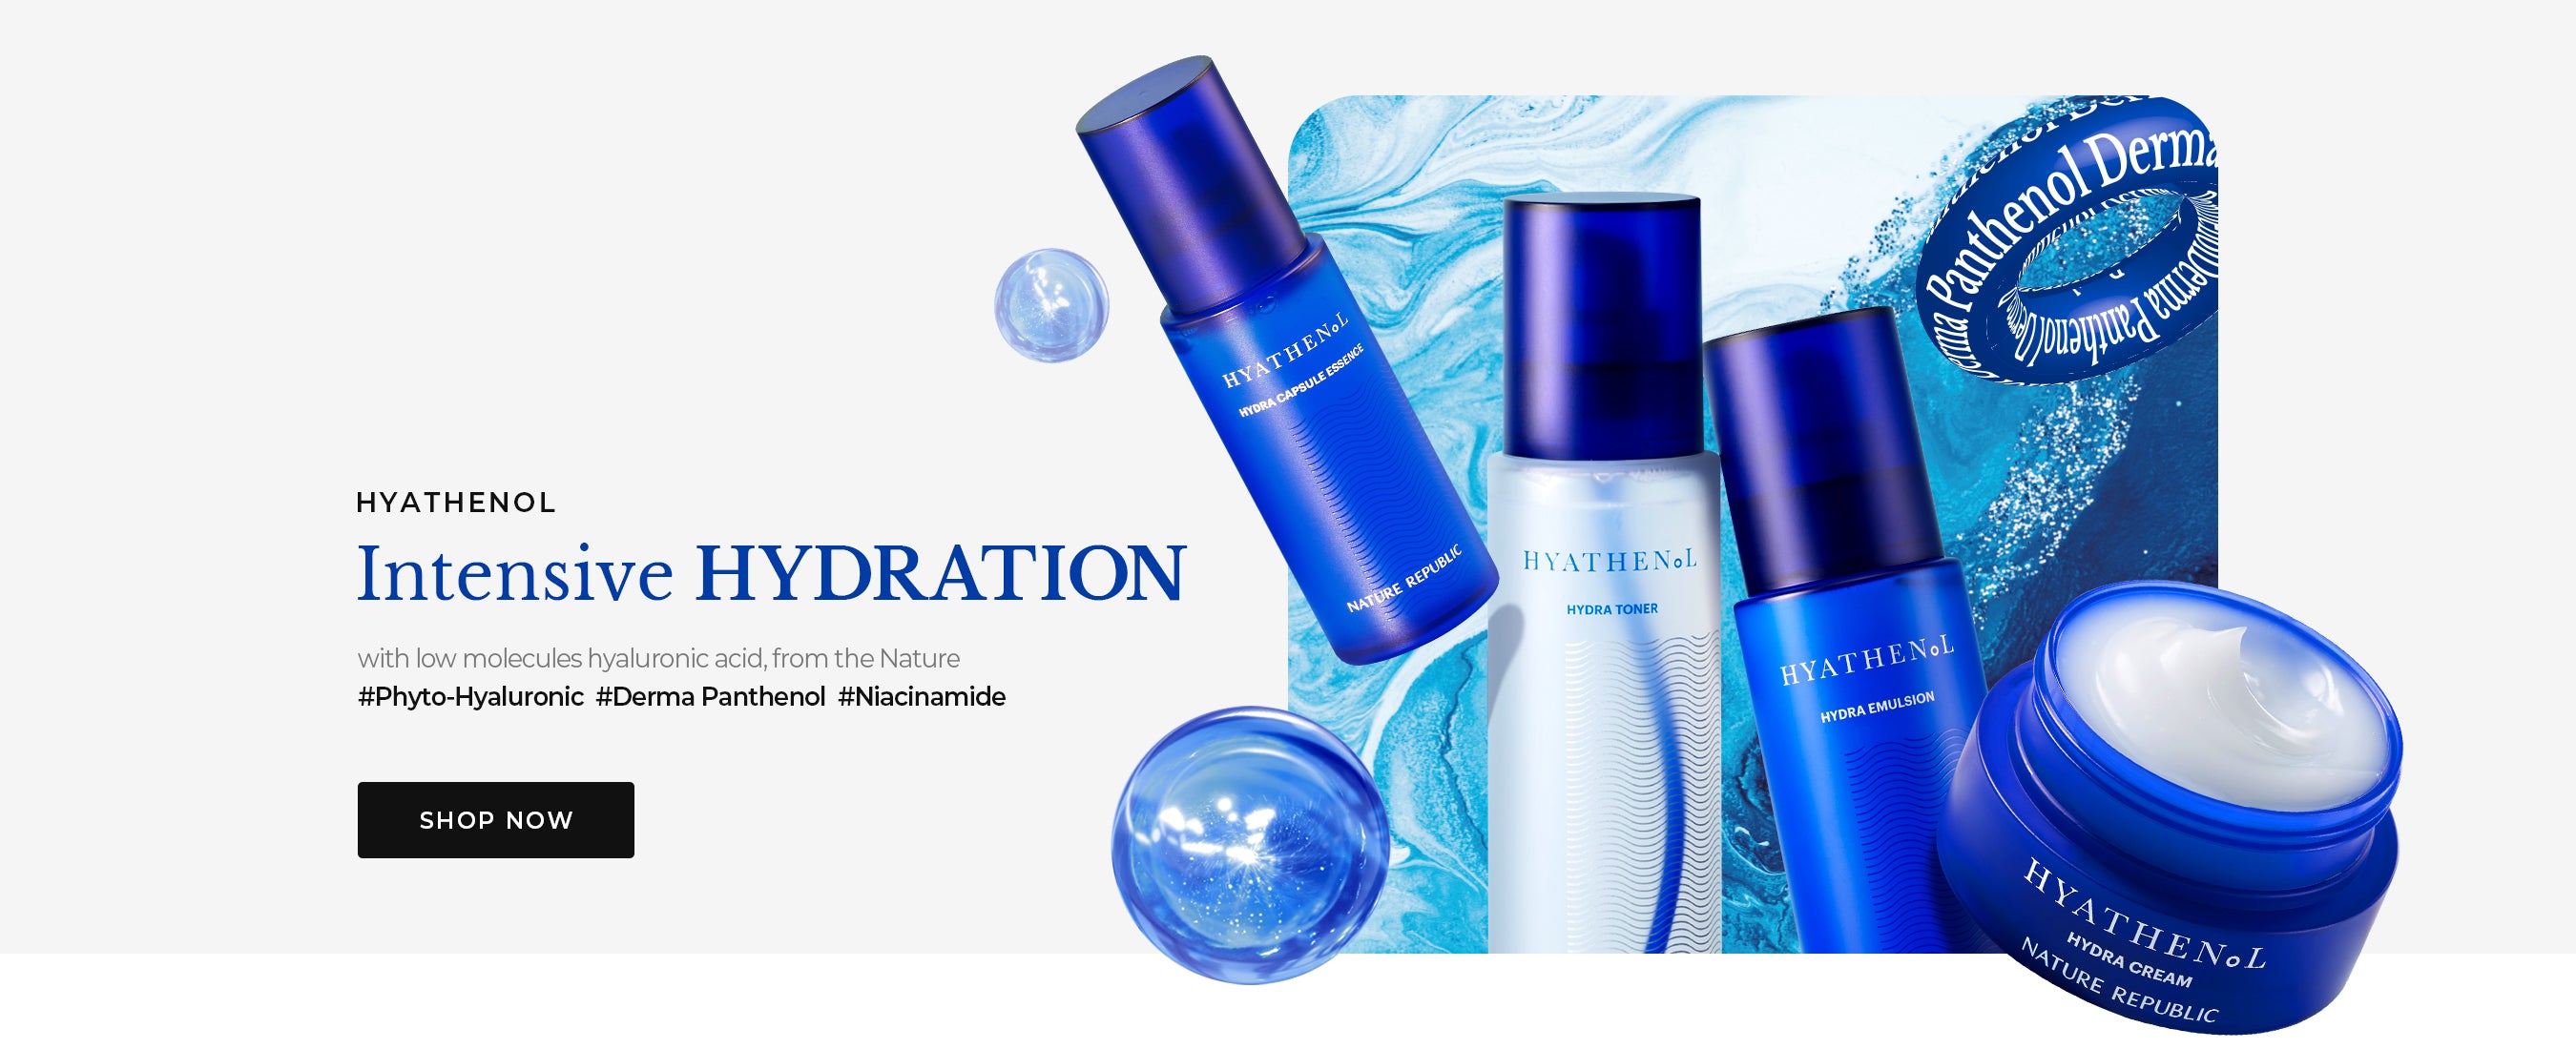 Intensive Hydration with low molecules hyaluronic acid, from the Nature